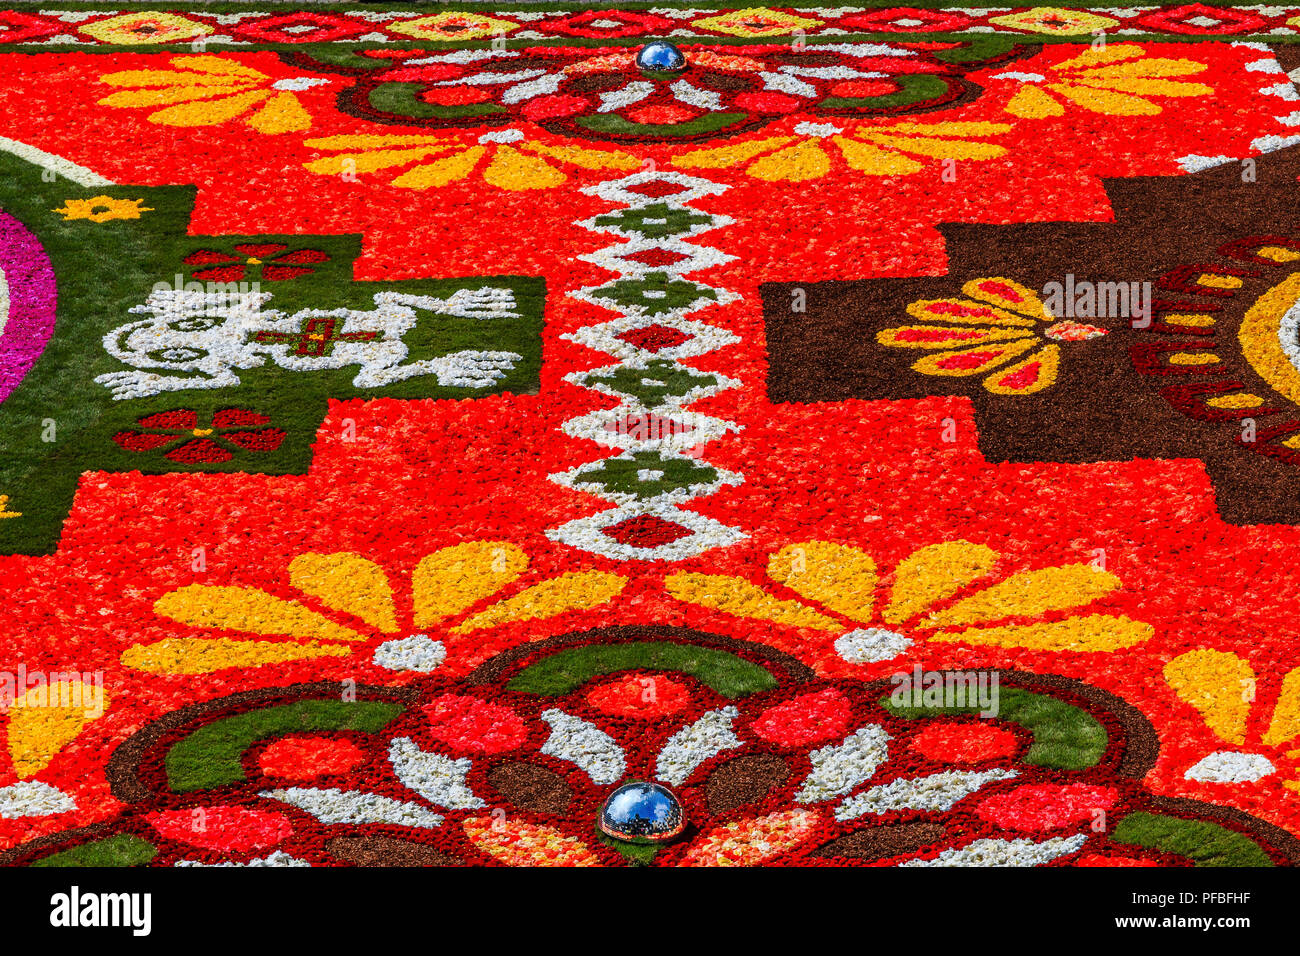 Brussels, Belgium  - August 16, 2018: Flower Carpet on Grand Place in Brussels, Belgium. Stock Photo